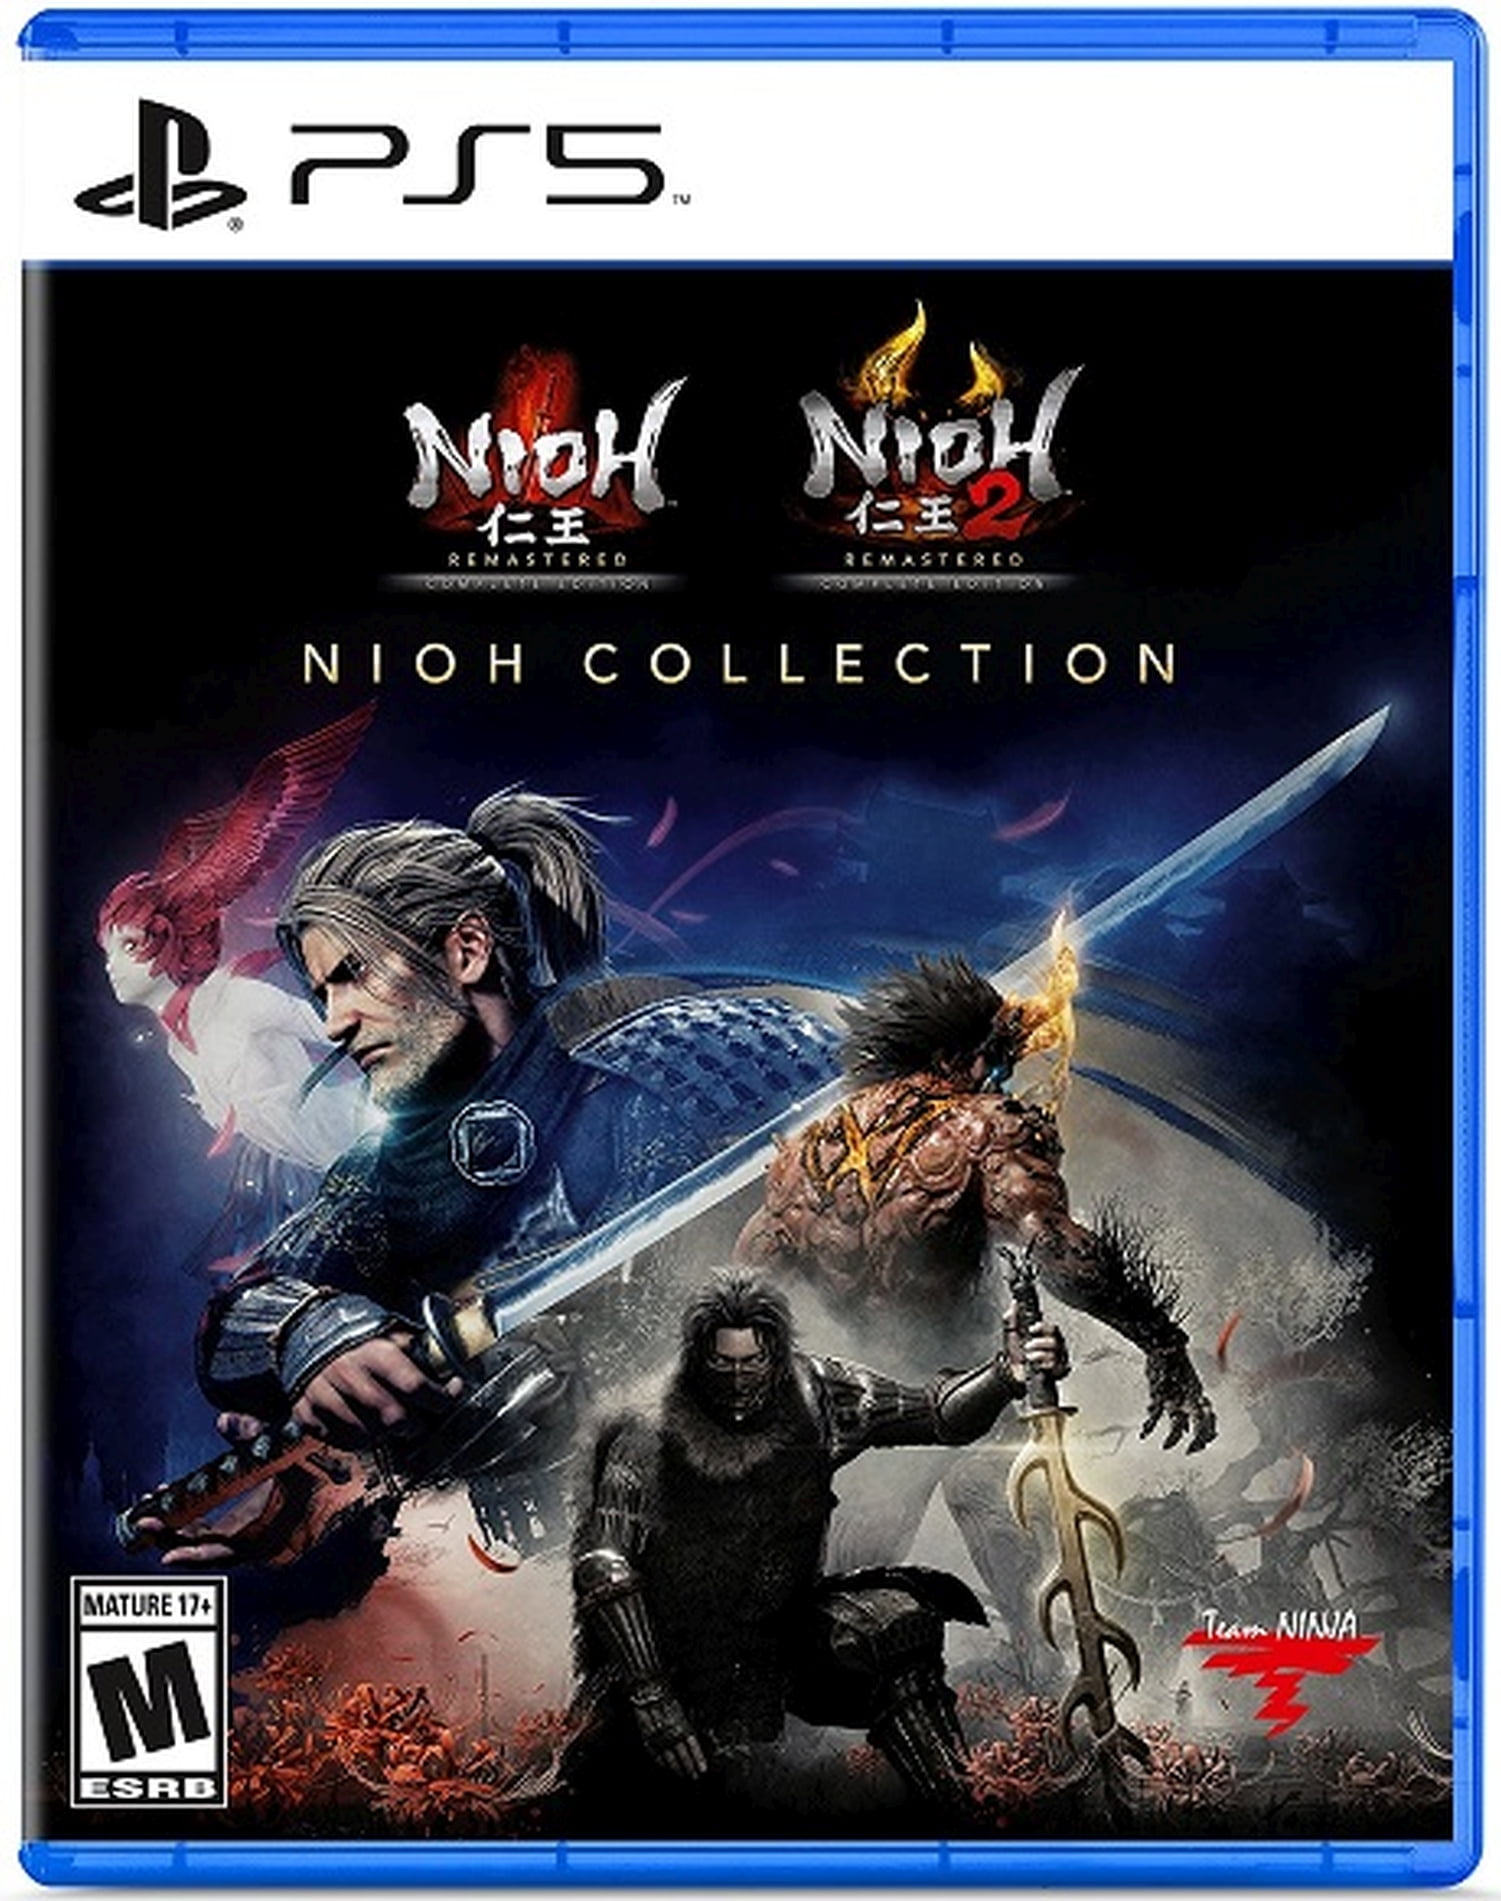 The Nioh Collection for PlayStation 5, Physical Edition